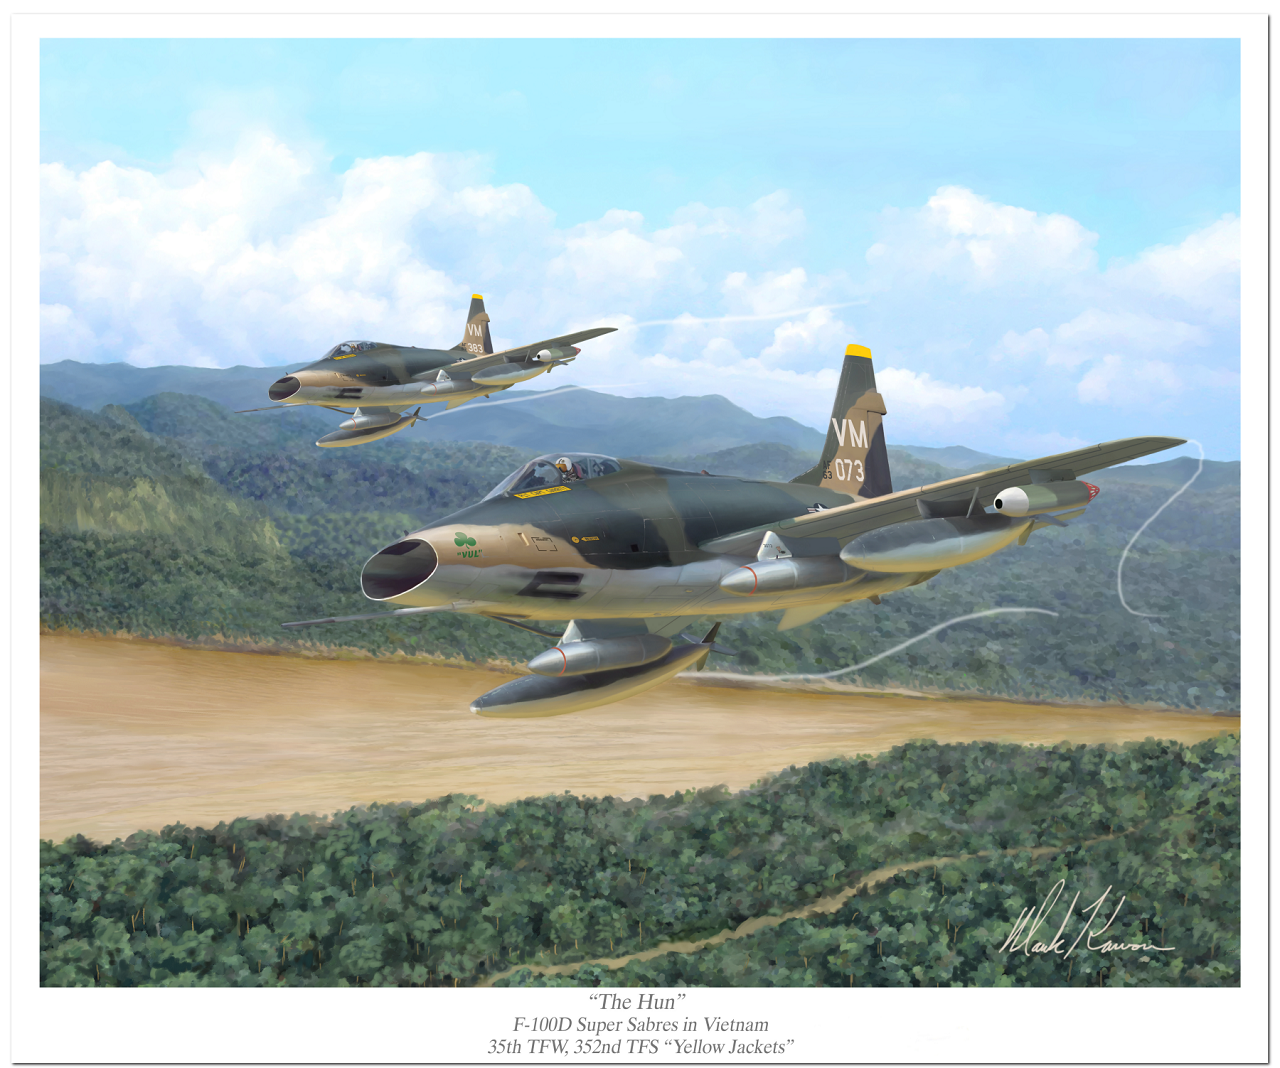 "The Hun" by Mark Karvon featuring the USAF F-100D Super Sabre in Vietnam